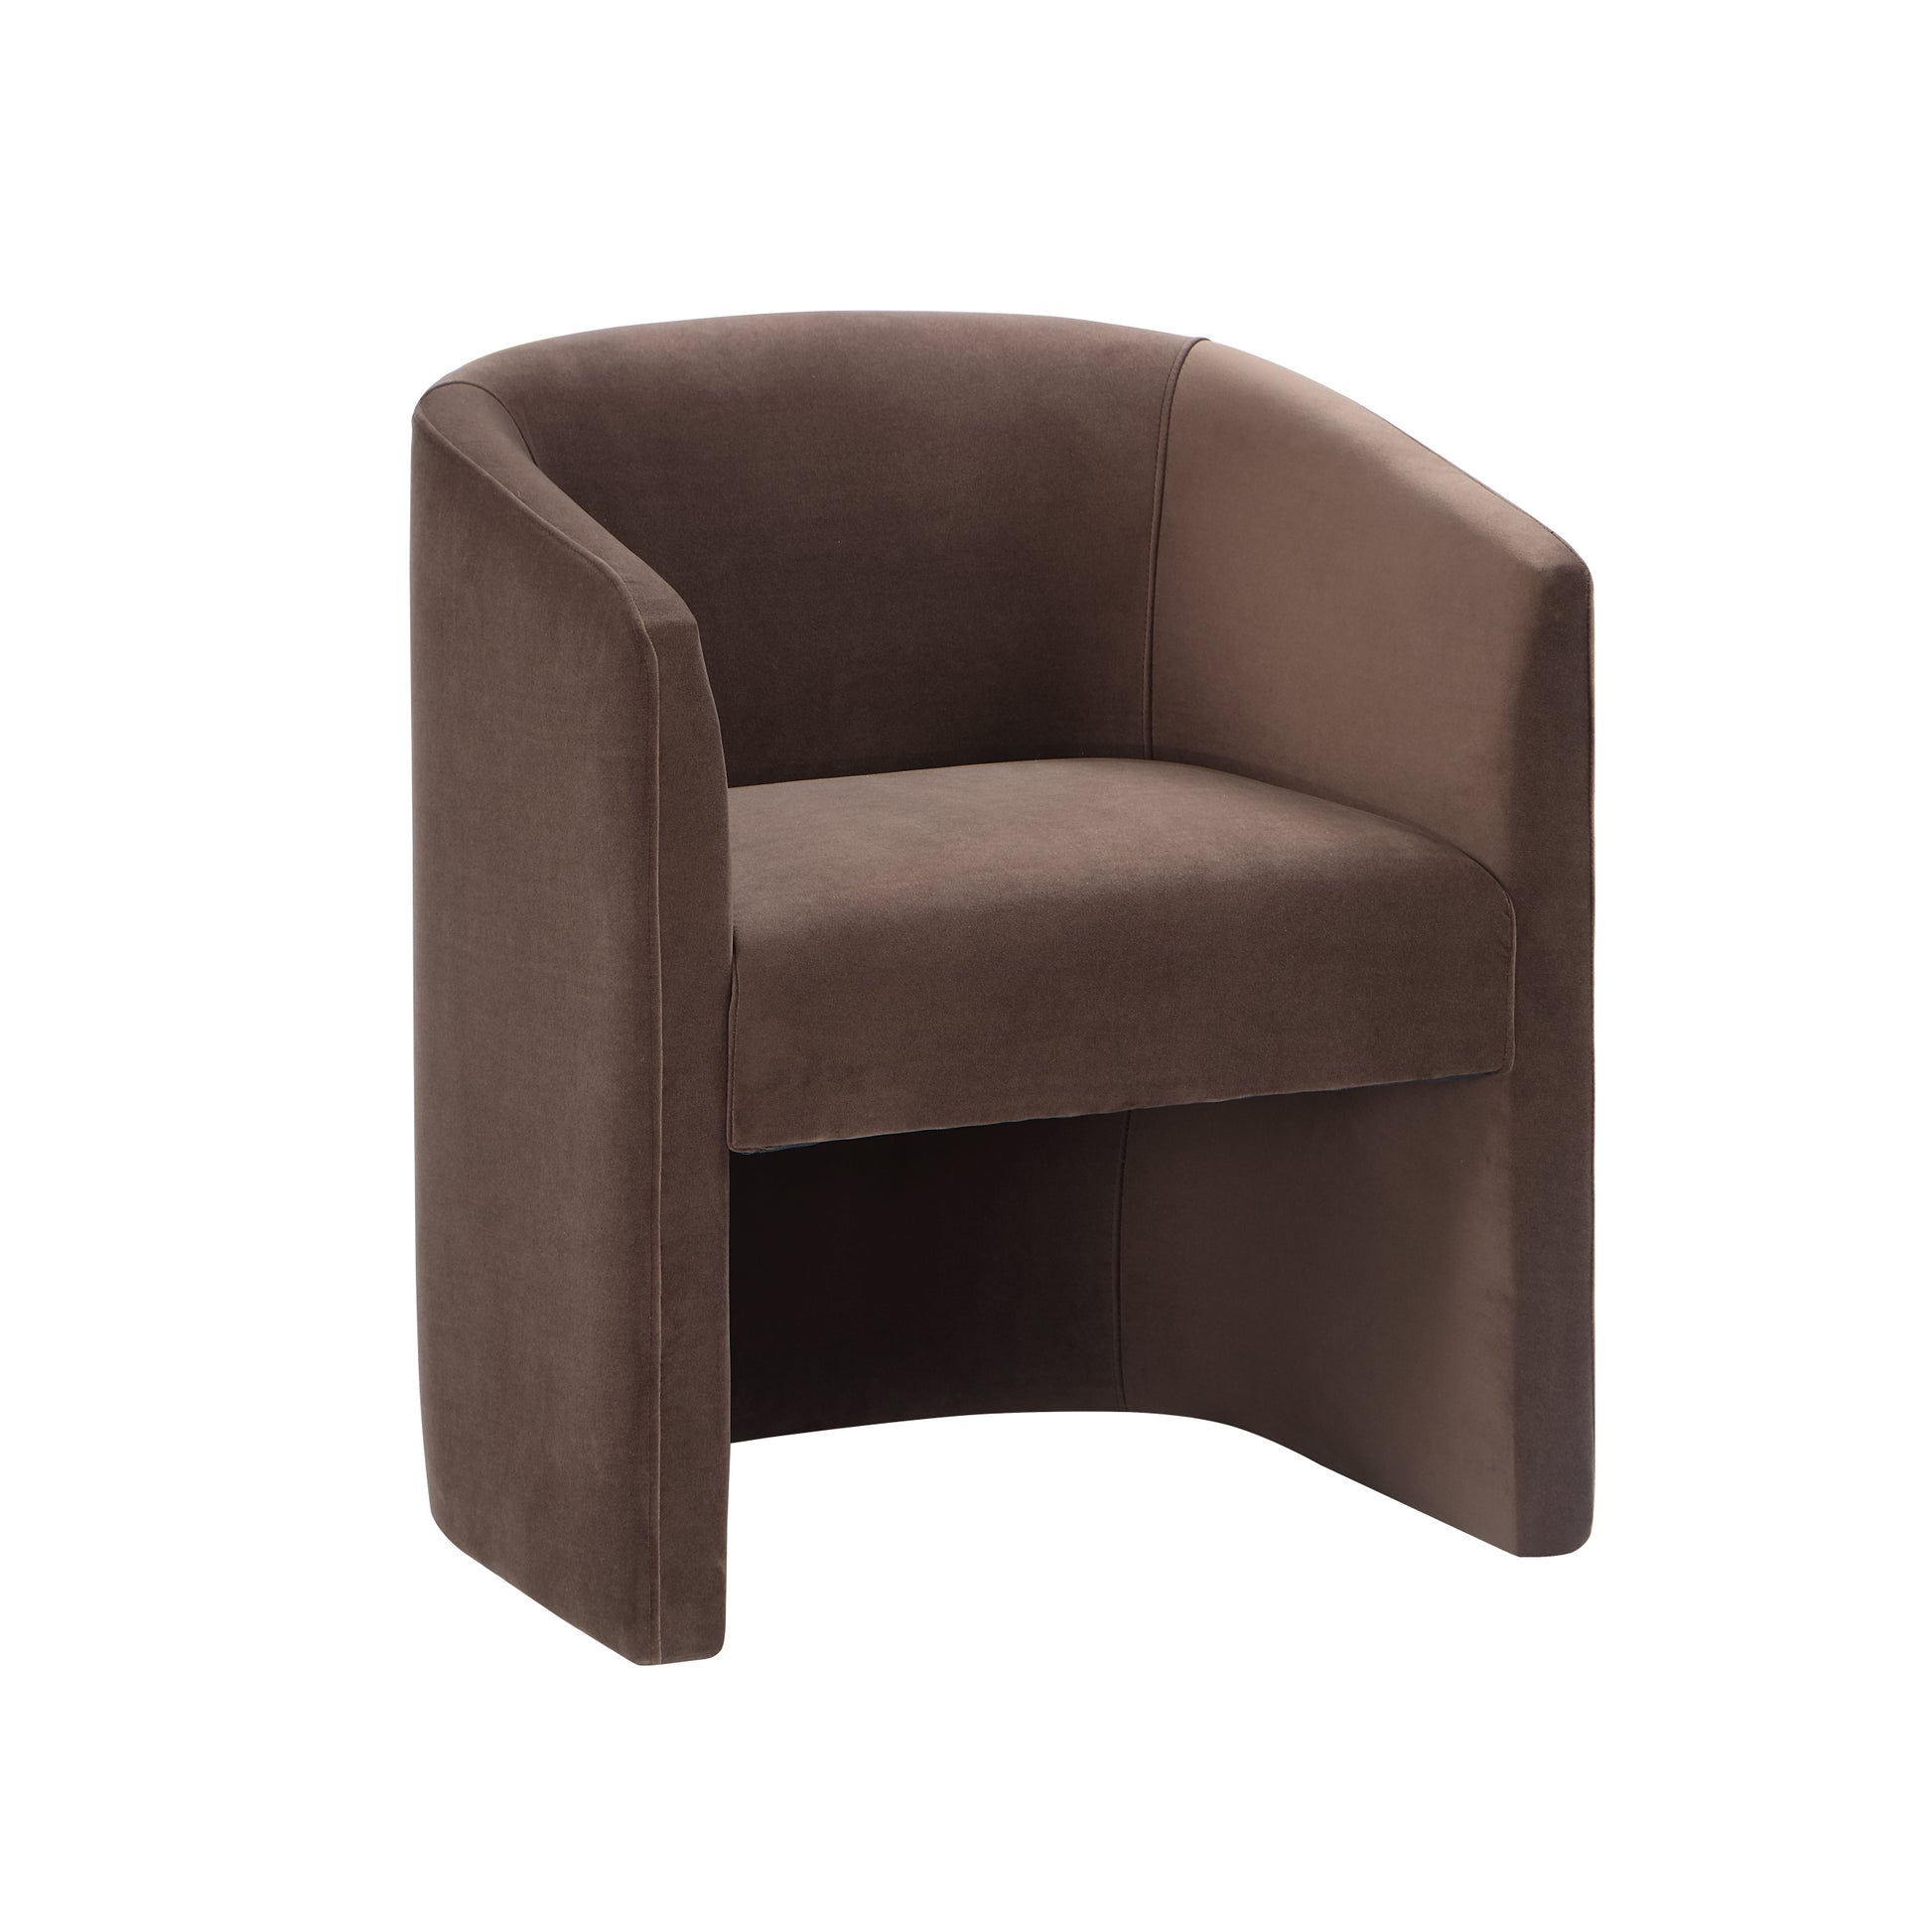 Iris Upholstered Dining Or Accent Chair Cocoa -